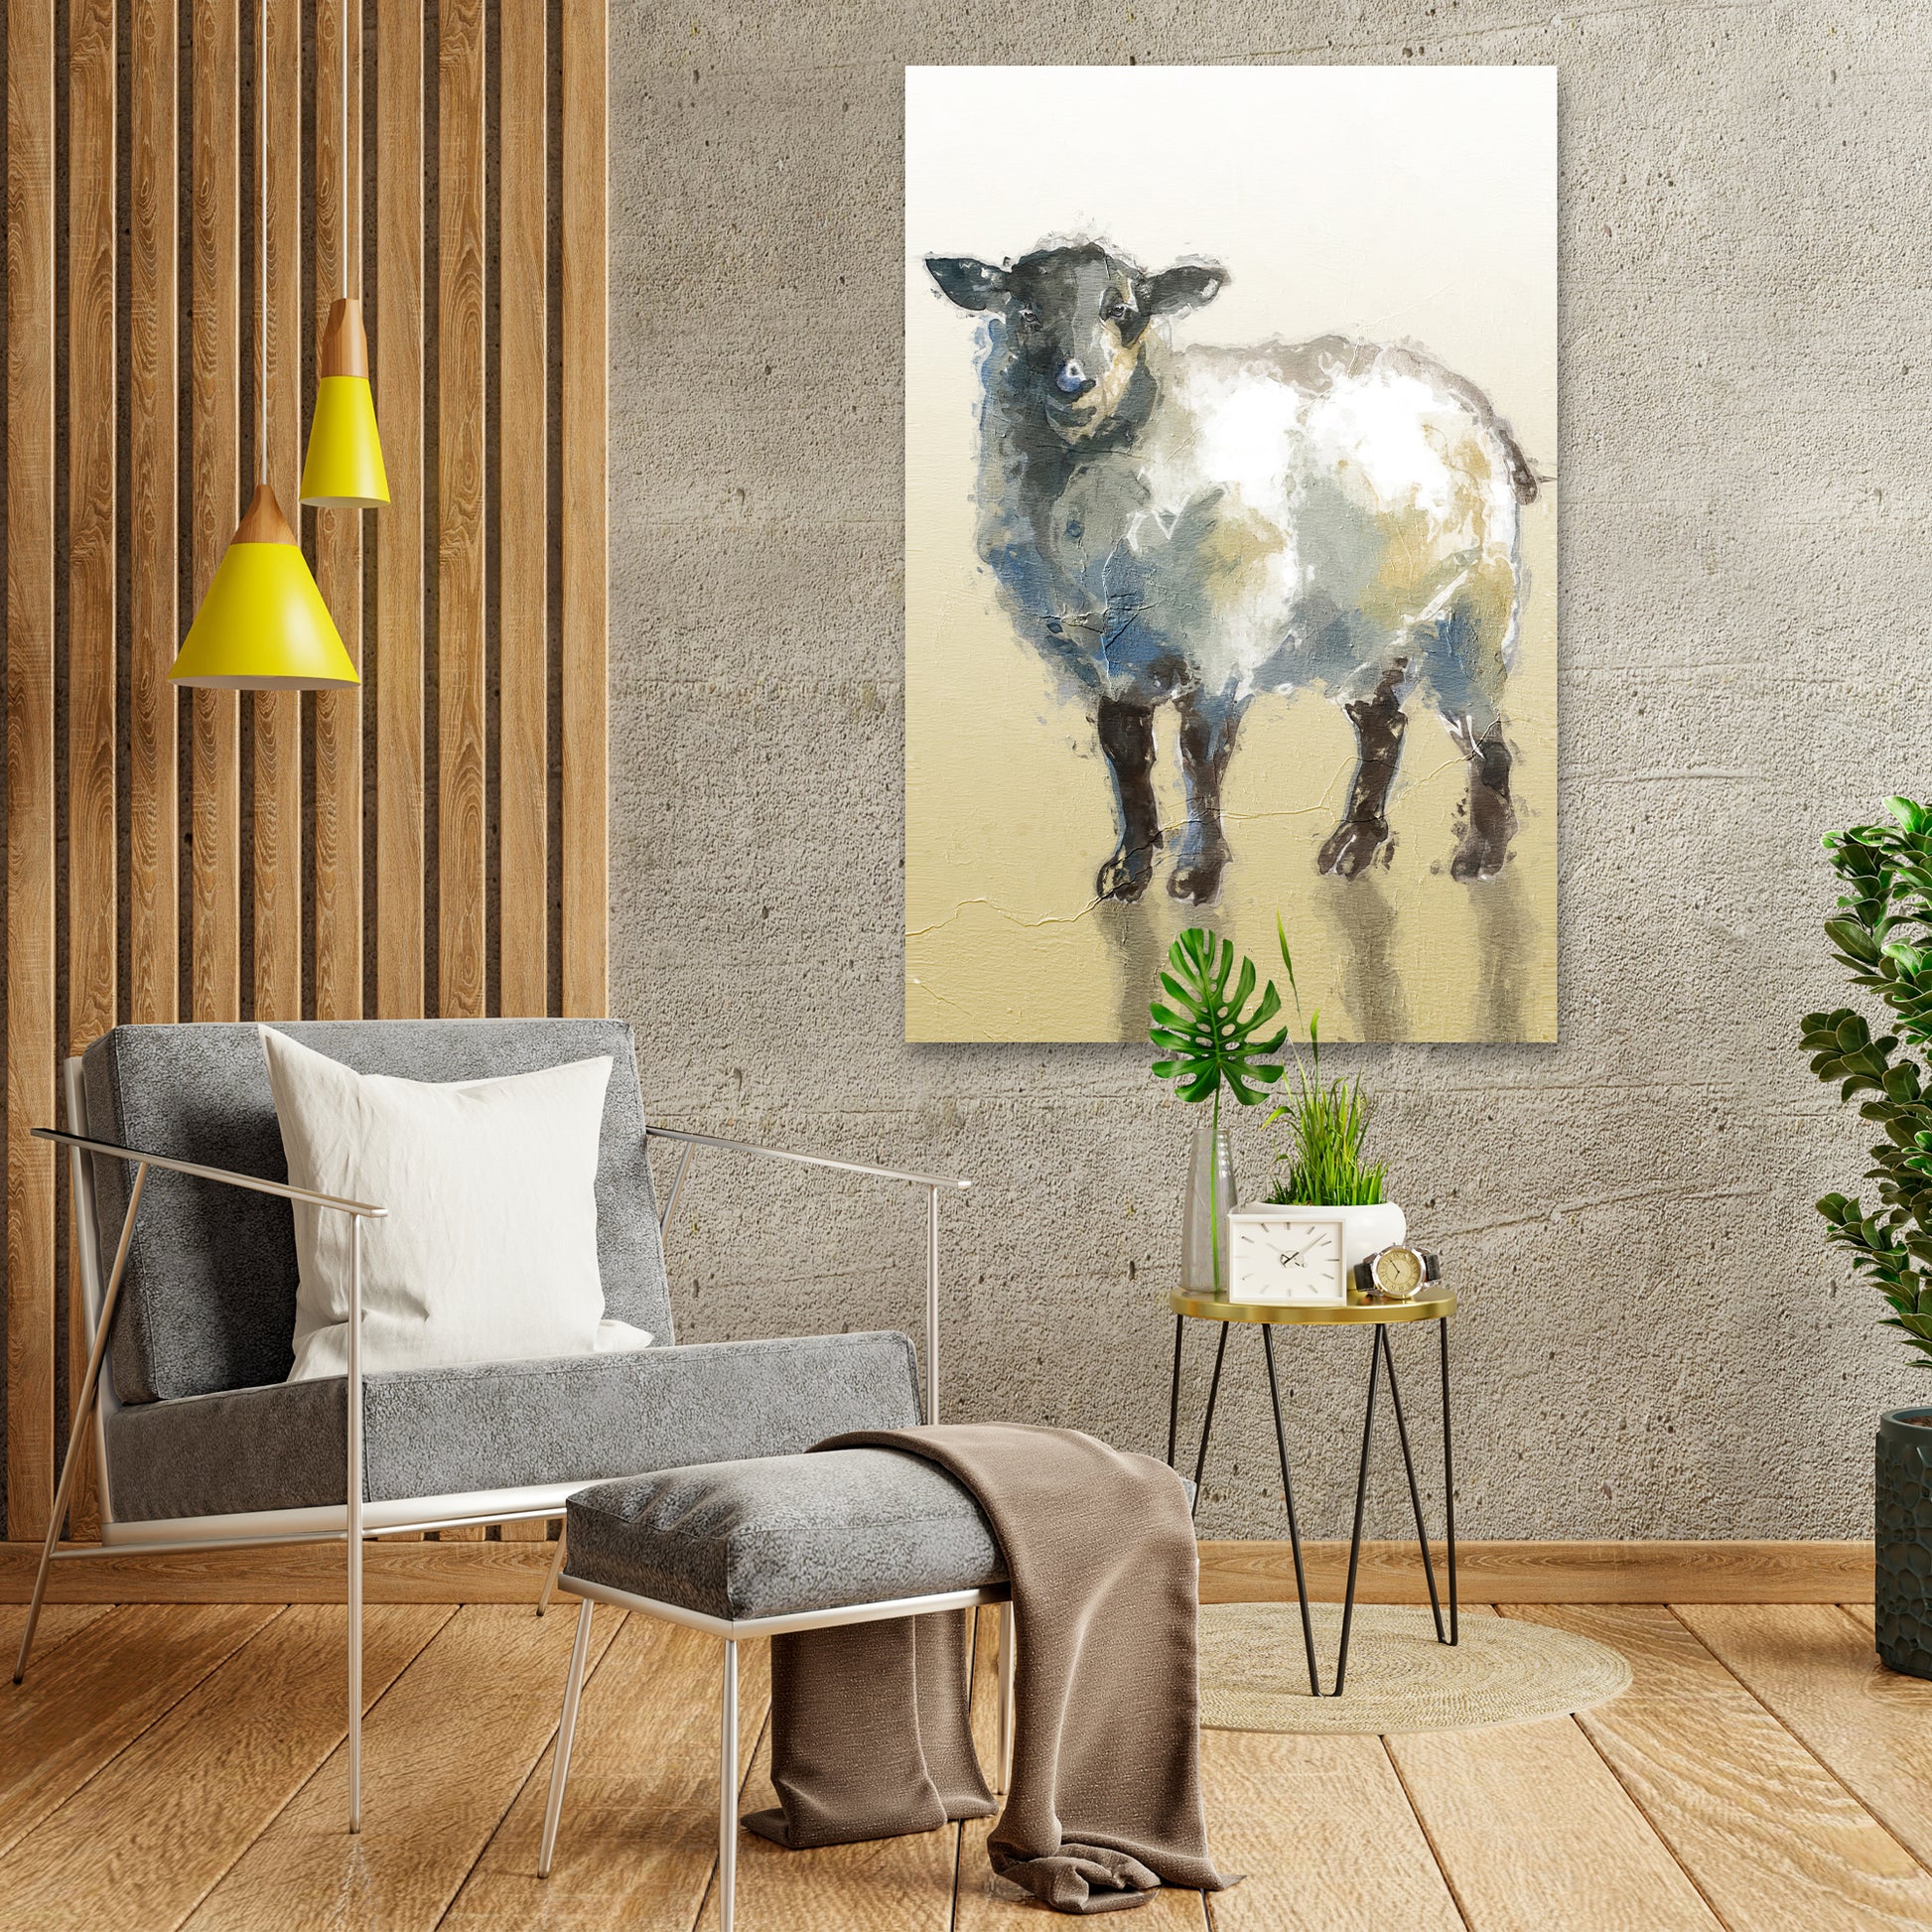 Minimal Sheep Painting Canvas Wall Art Style 2 - Image by Tailored Canvases